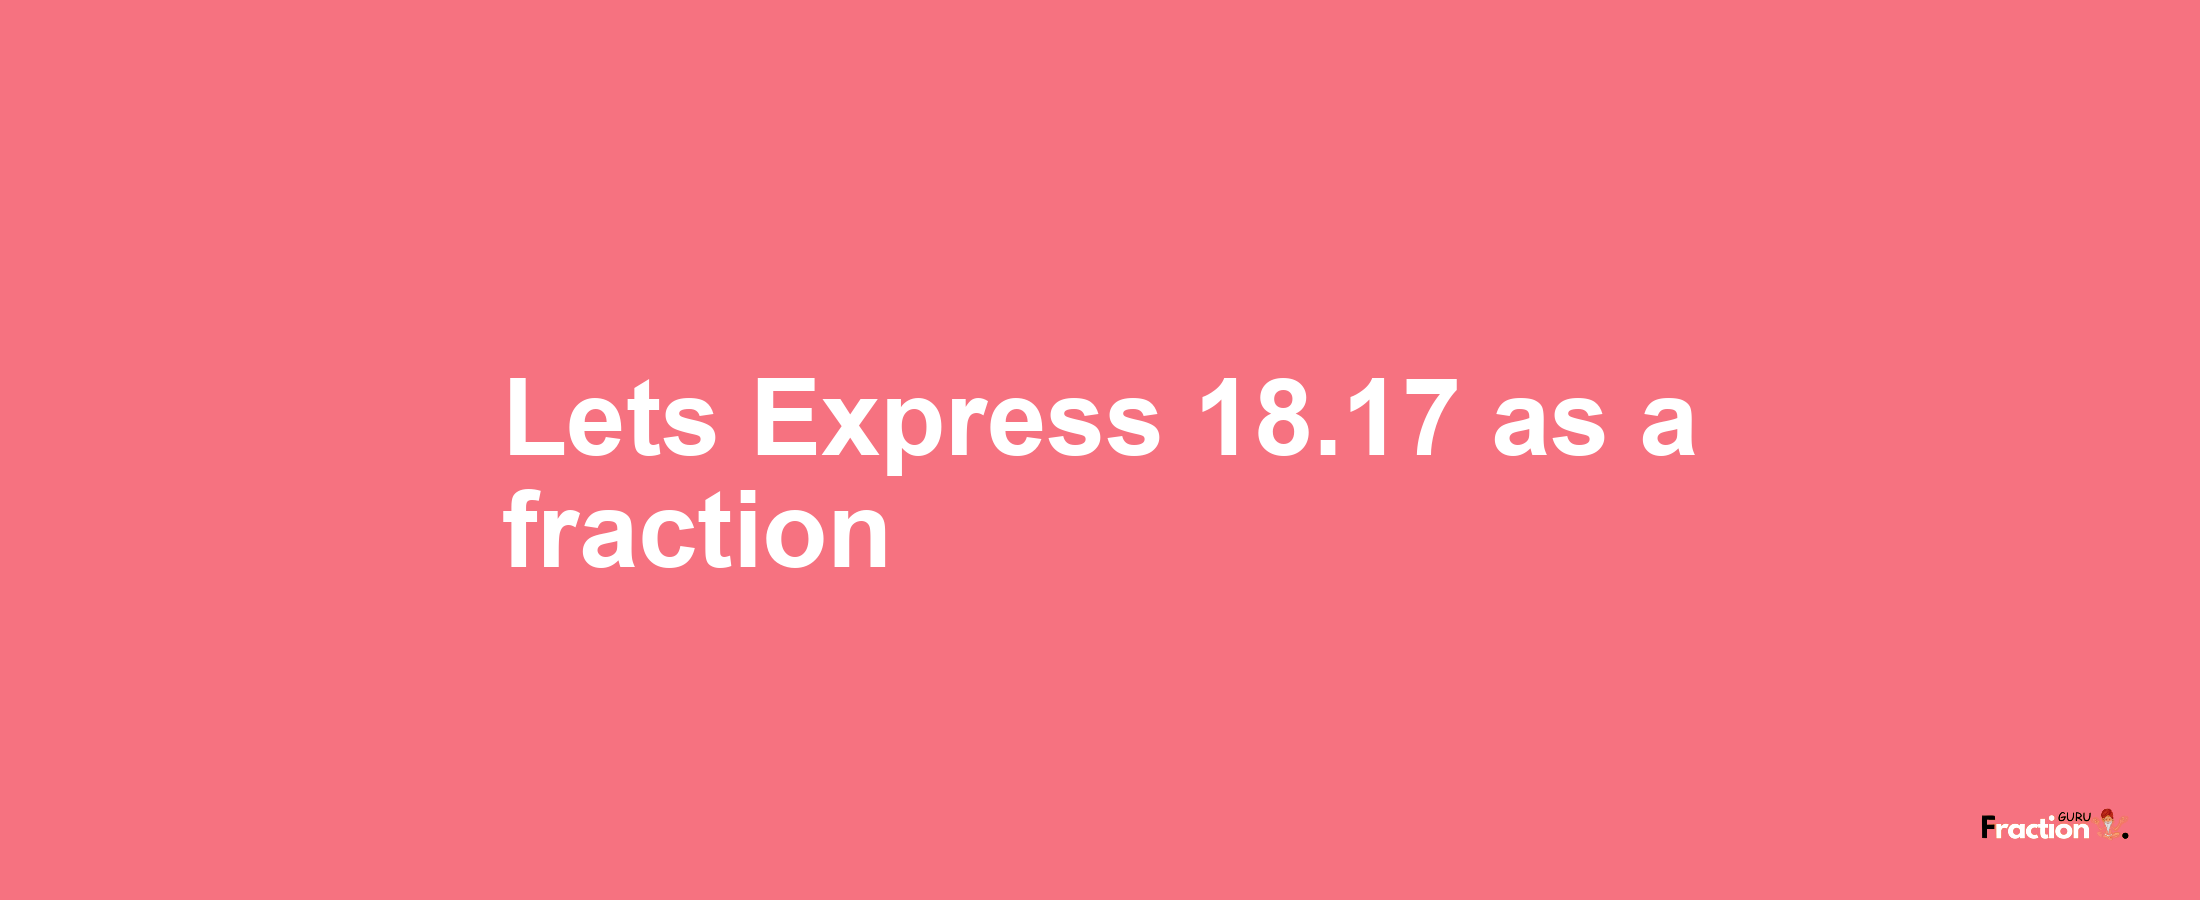 Lets Express 18.17 as afraction